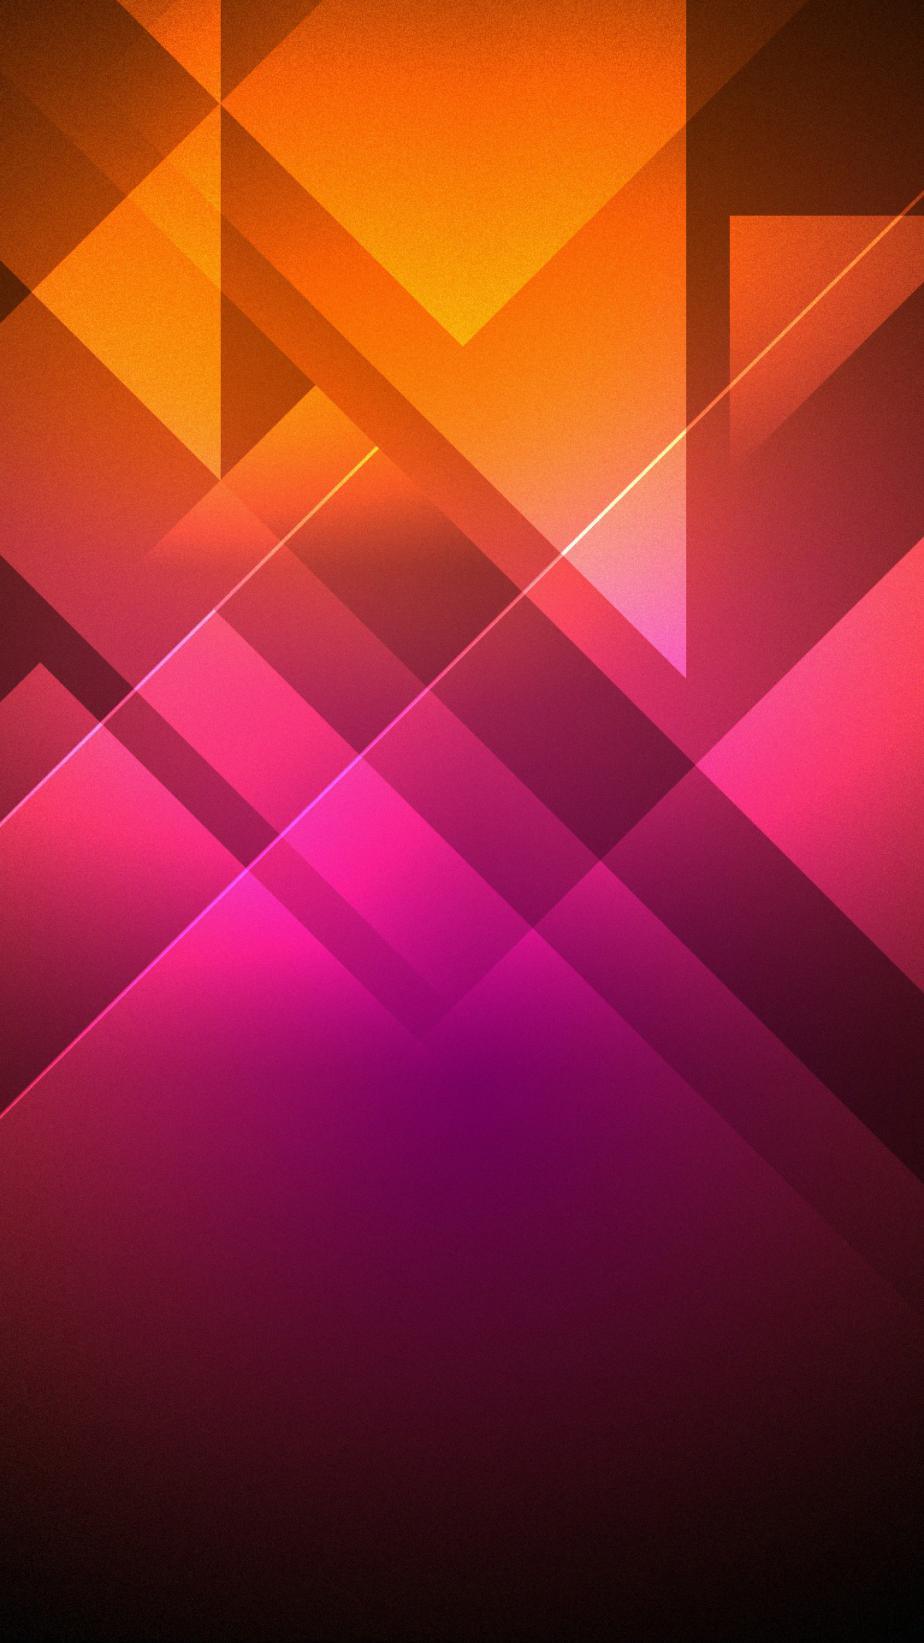 HTC Wallpaper Image in HD Free Download for Mobile